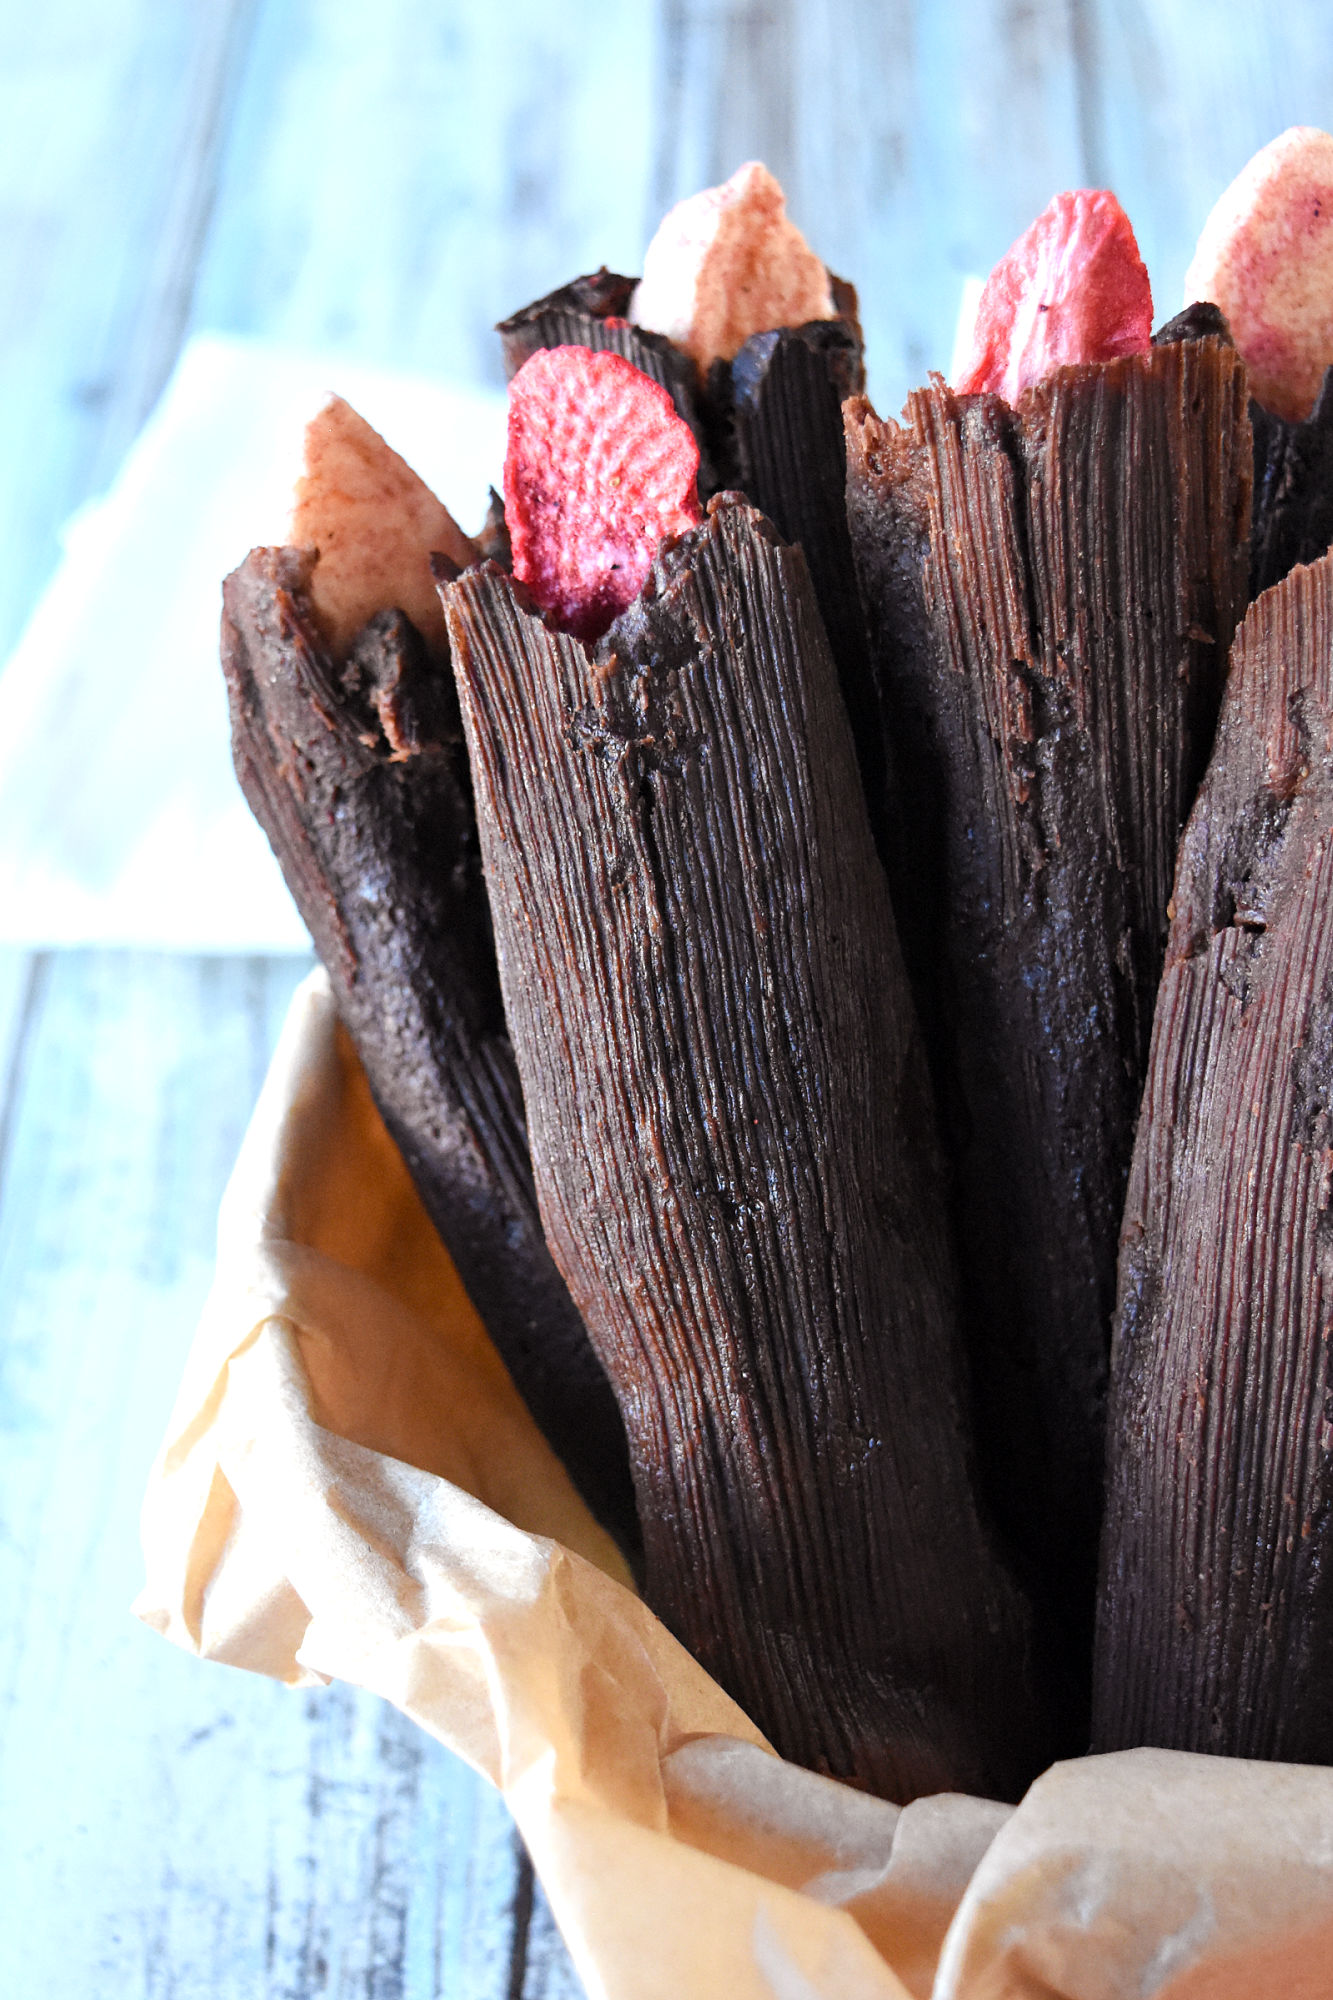 Searching for the perfect Halloween party snack? Look no further! Our Frostbite Fingers recipe is guaranteed to be the ultimate pleaser. #HalloweenTreatsWeek #tamales #chocolatetamale #frostbitefingers #Halloweenfood #partyfood